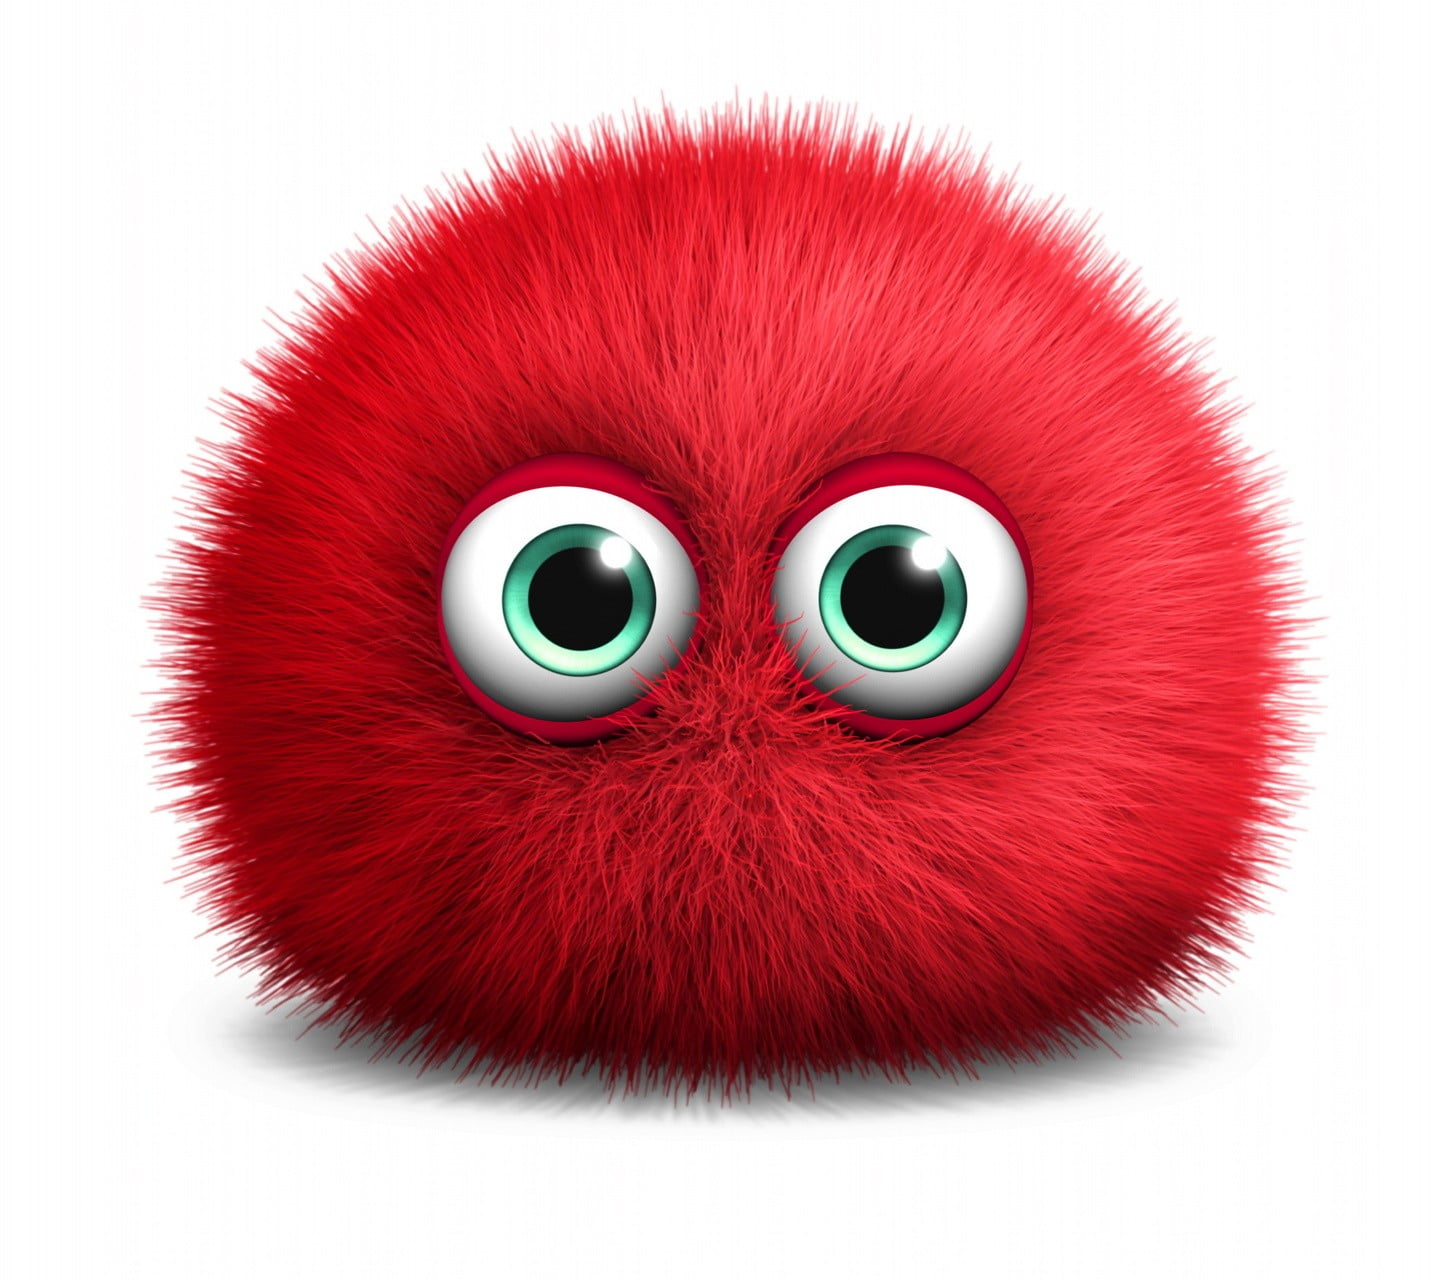 red cartoon character, Chuzzle